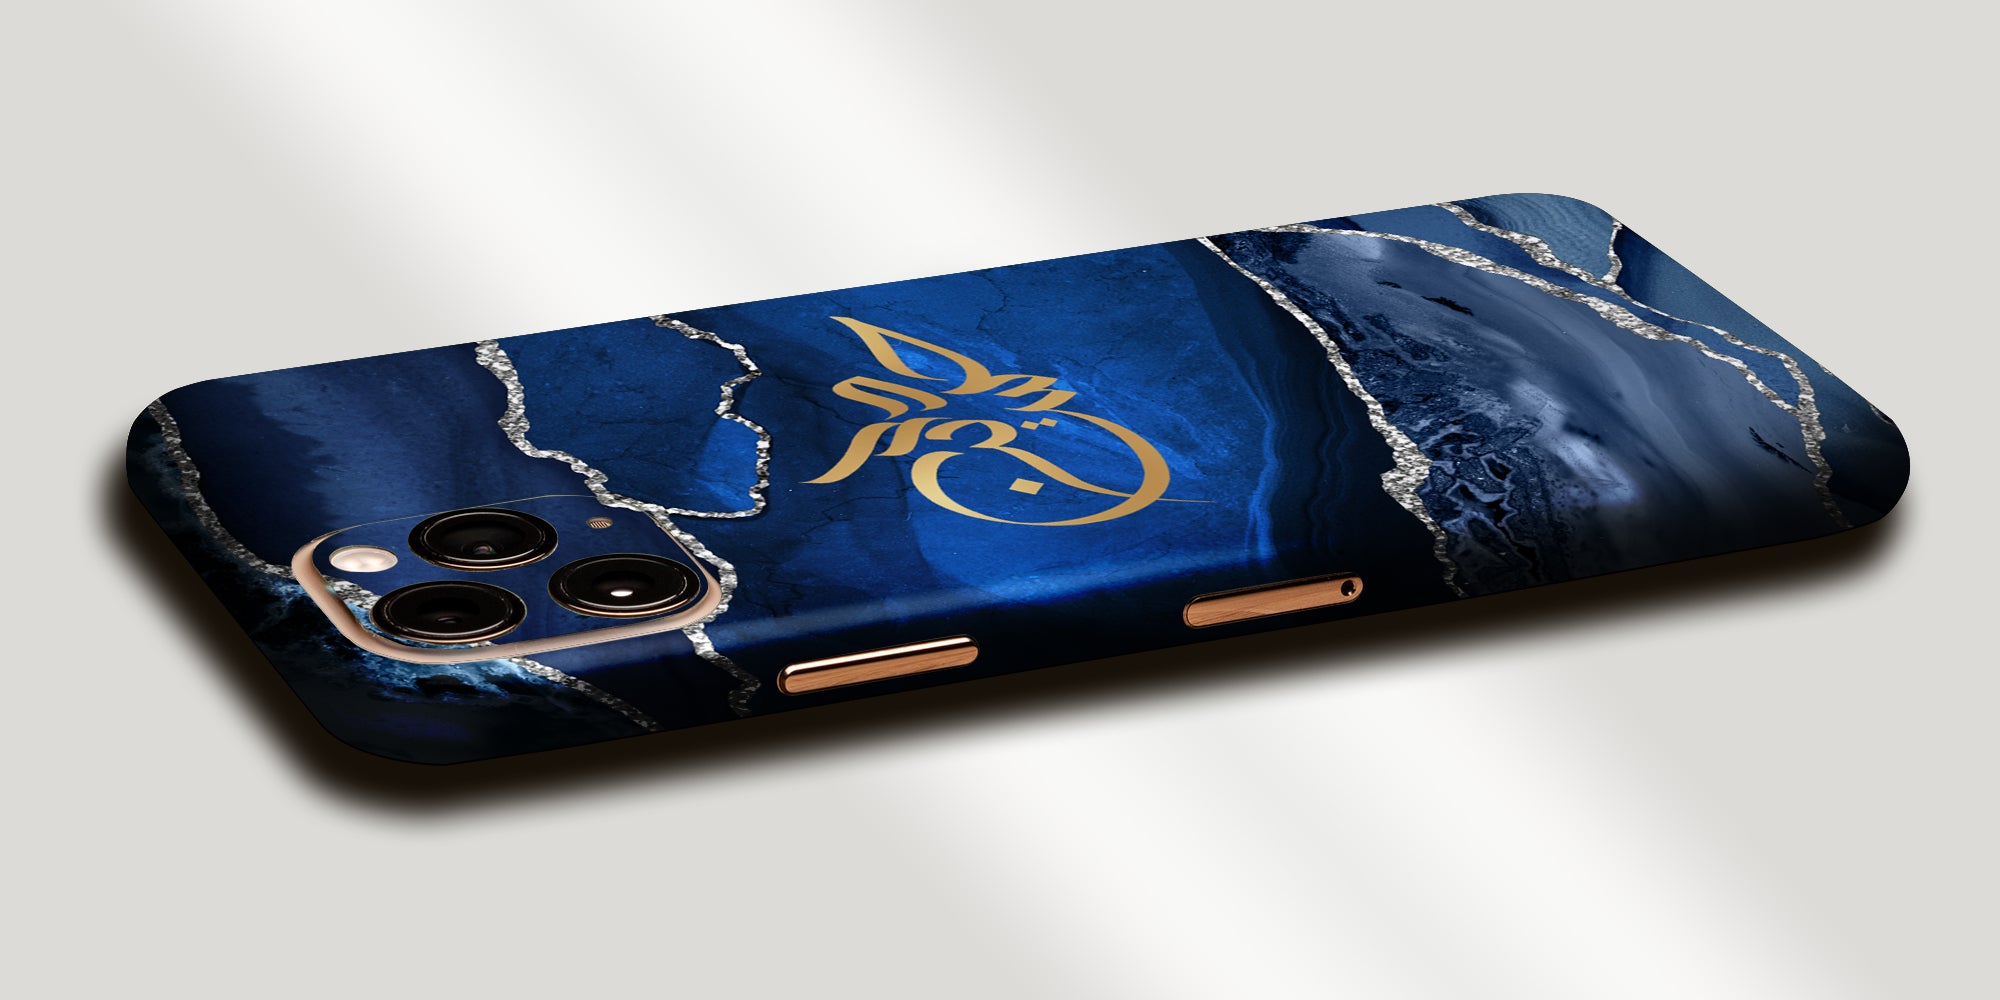 Agate Design Decal Skin With Personalised Arabic Name Phone Wrap - Blue